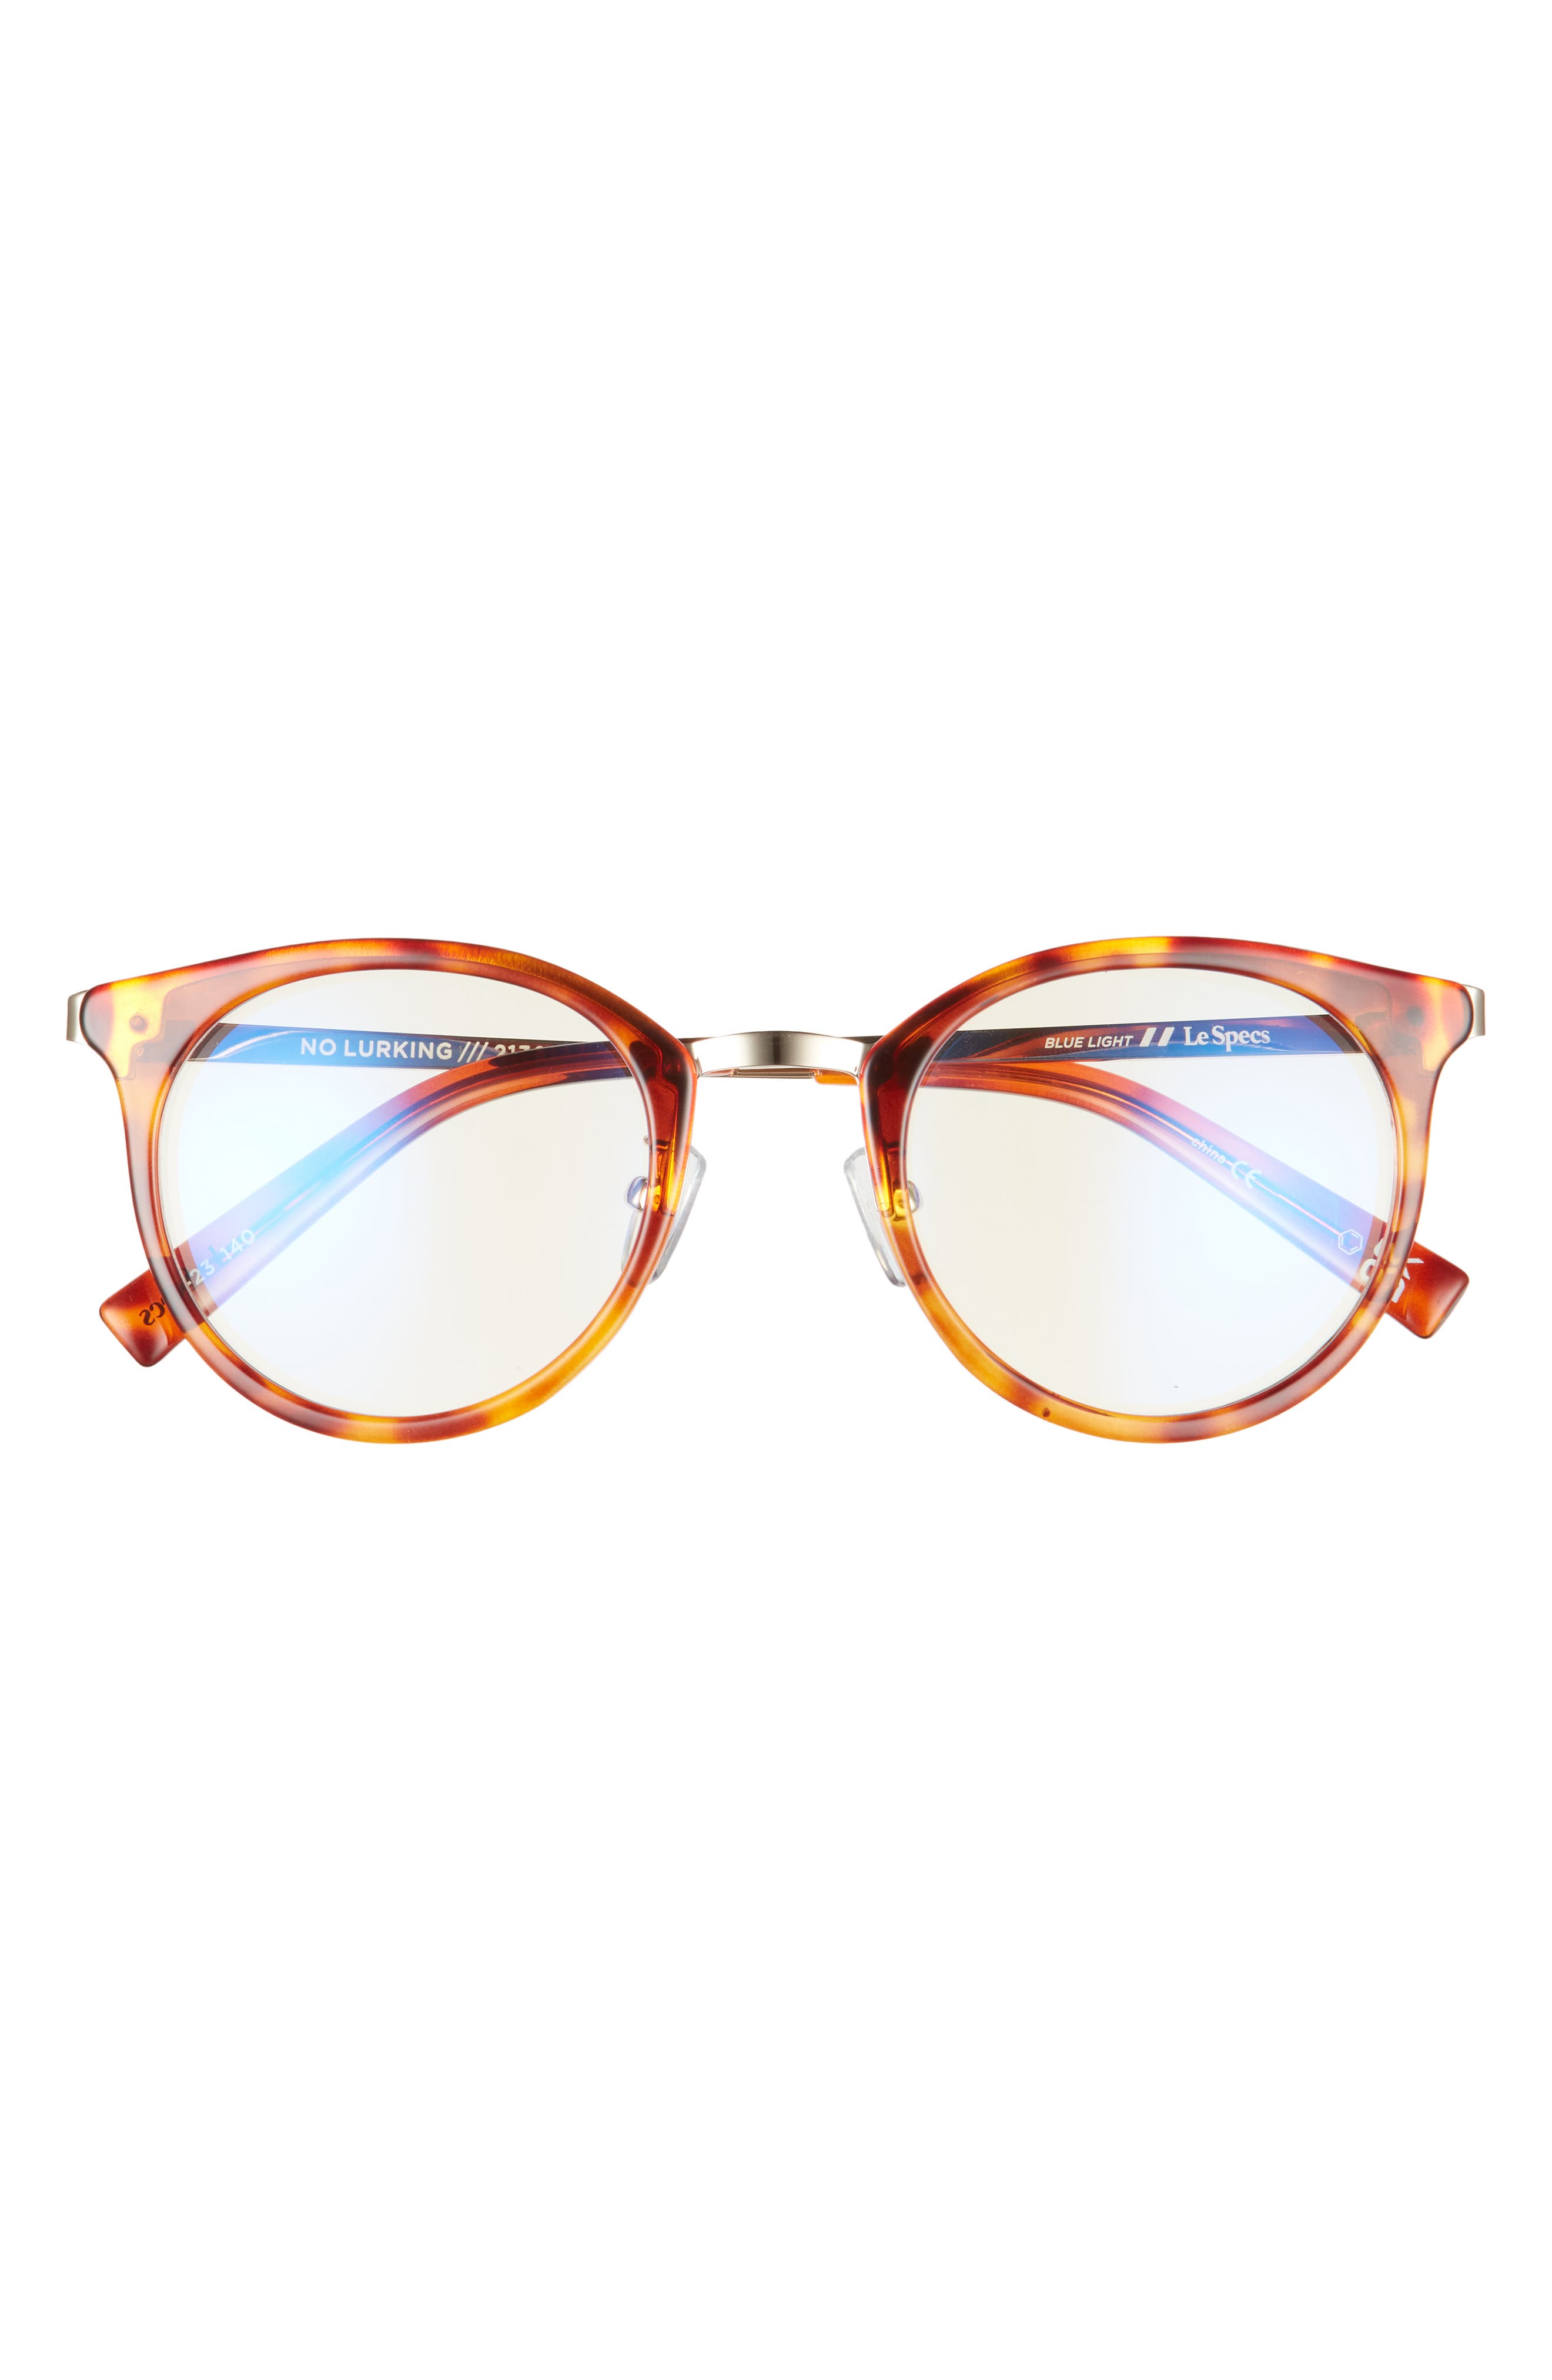 Le Specs No Lurking 49mm Round Blue Light Blocking Glasses in Tort /Gold /Anti Blue Light at Nordstrom